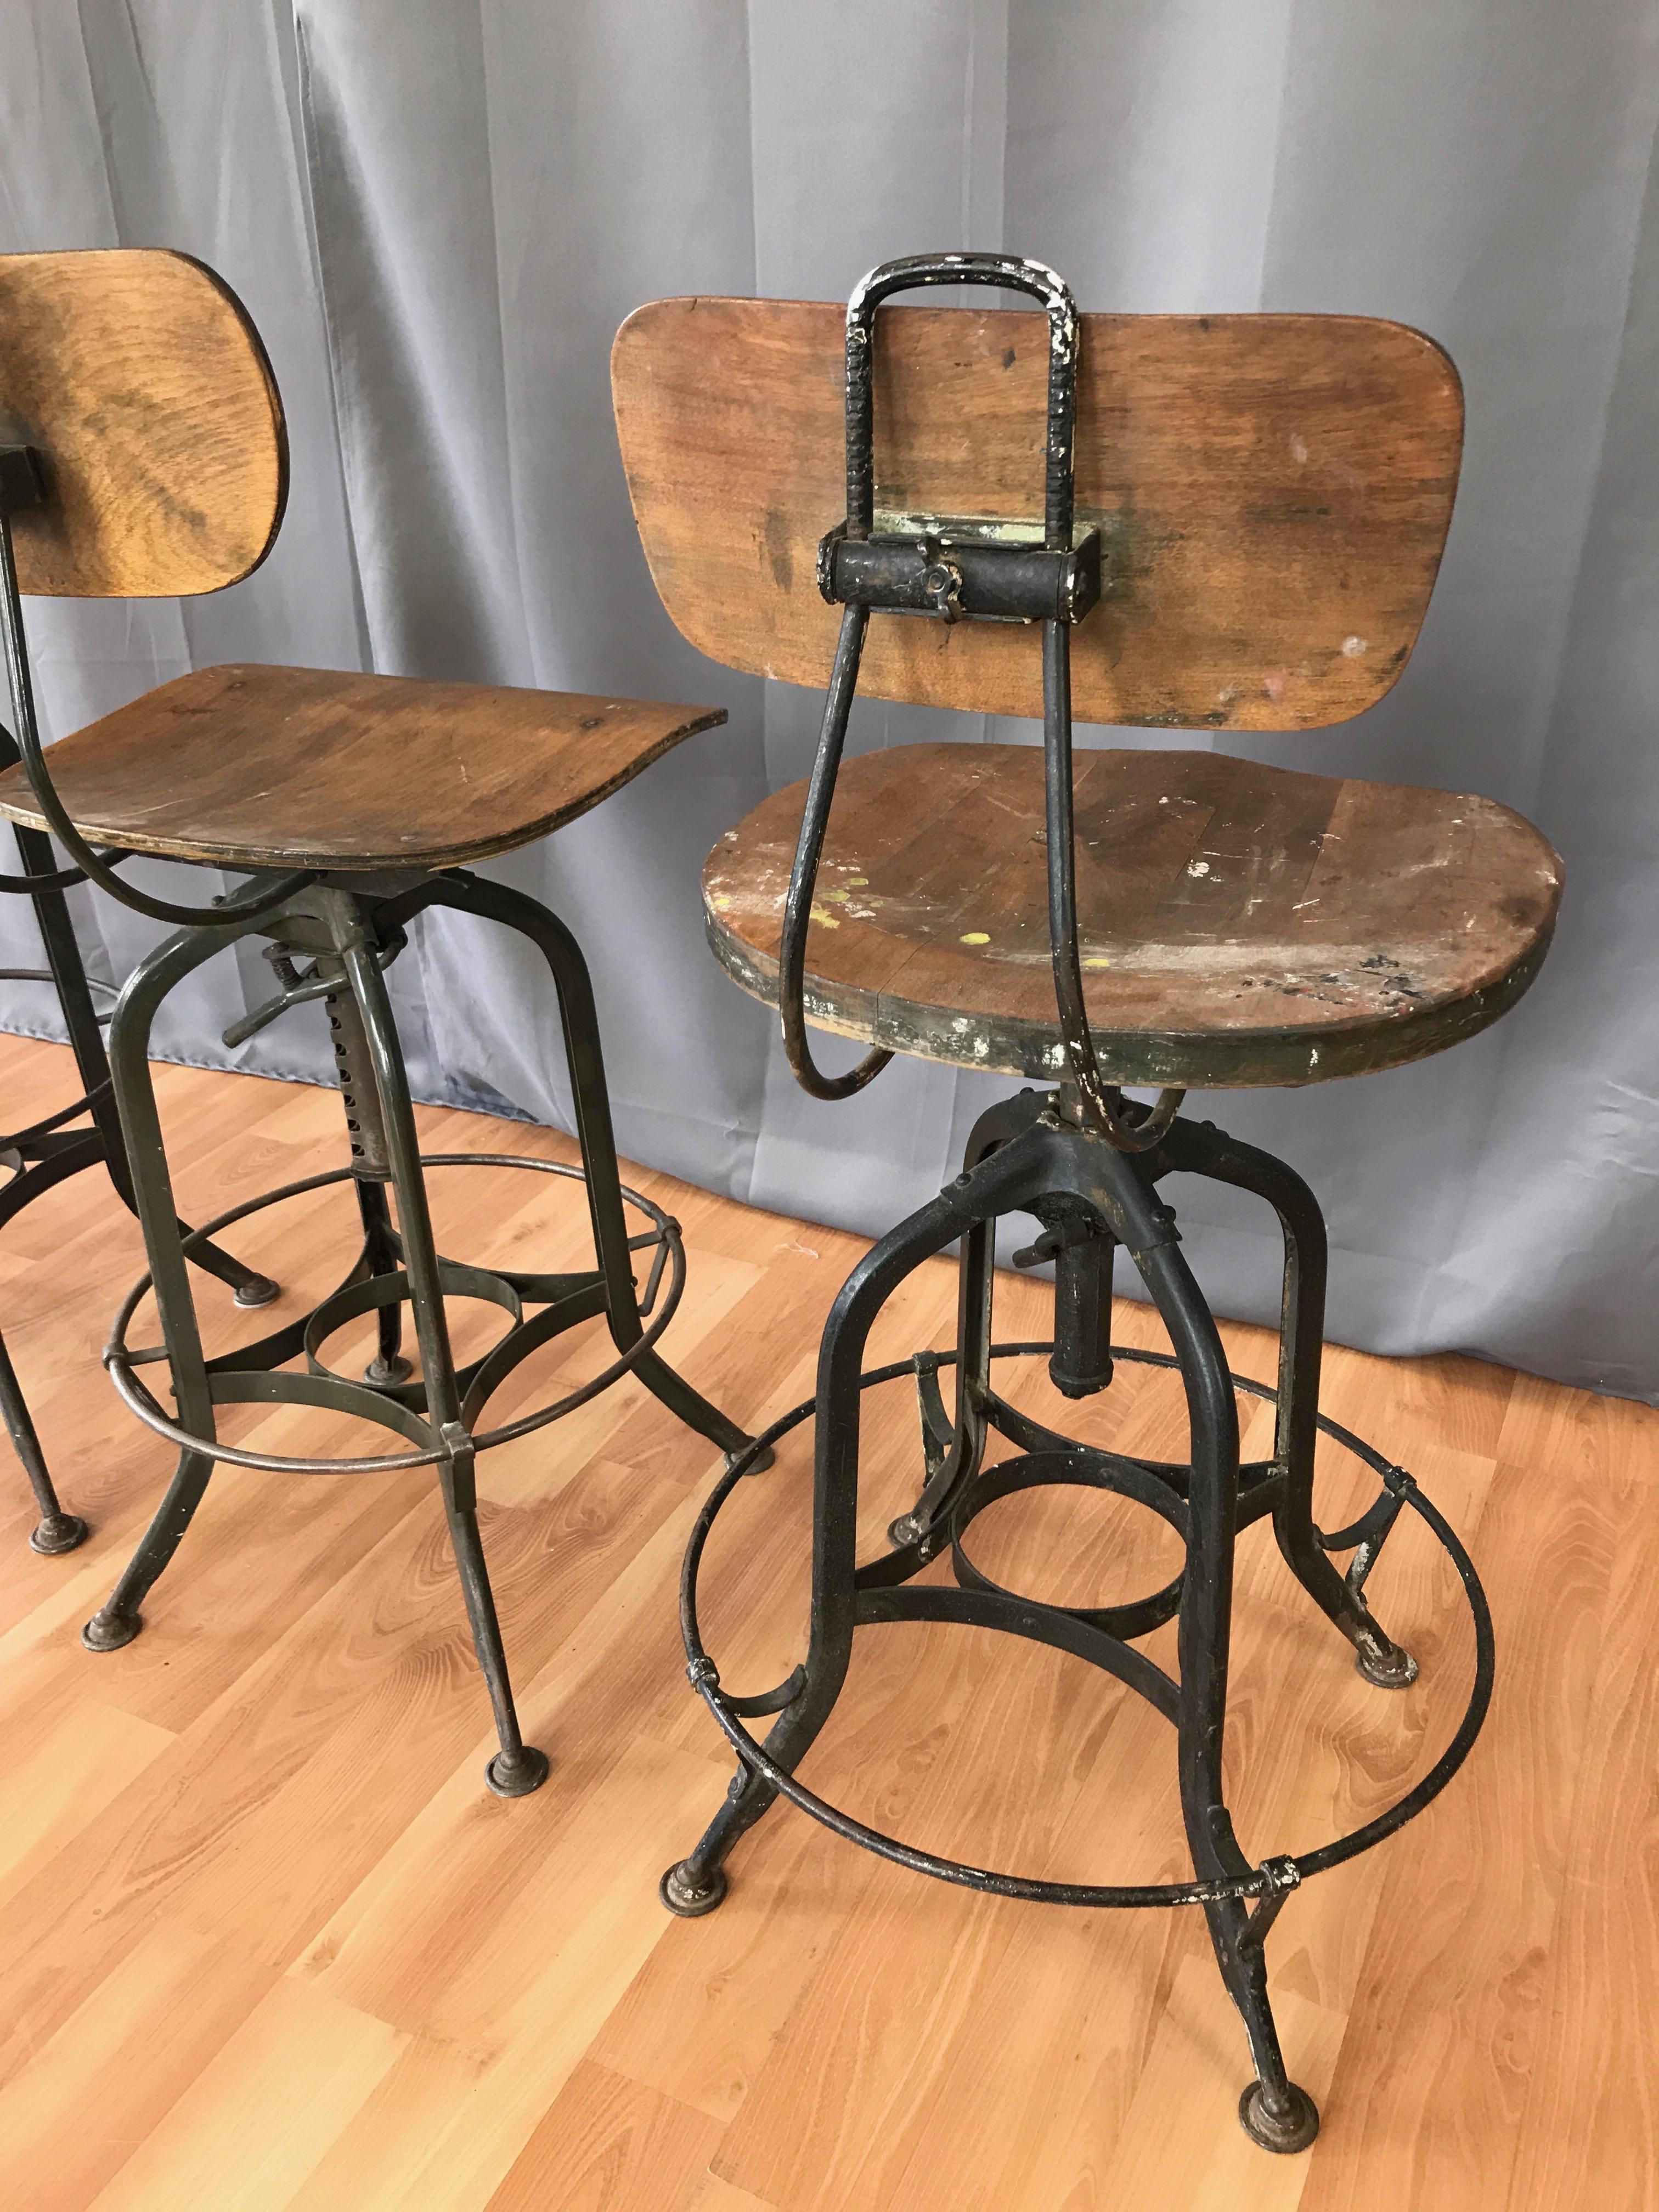 Toledo Industrial Adjustable Height Swivel Stools with Backs, Two Available 6